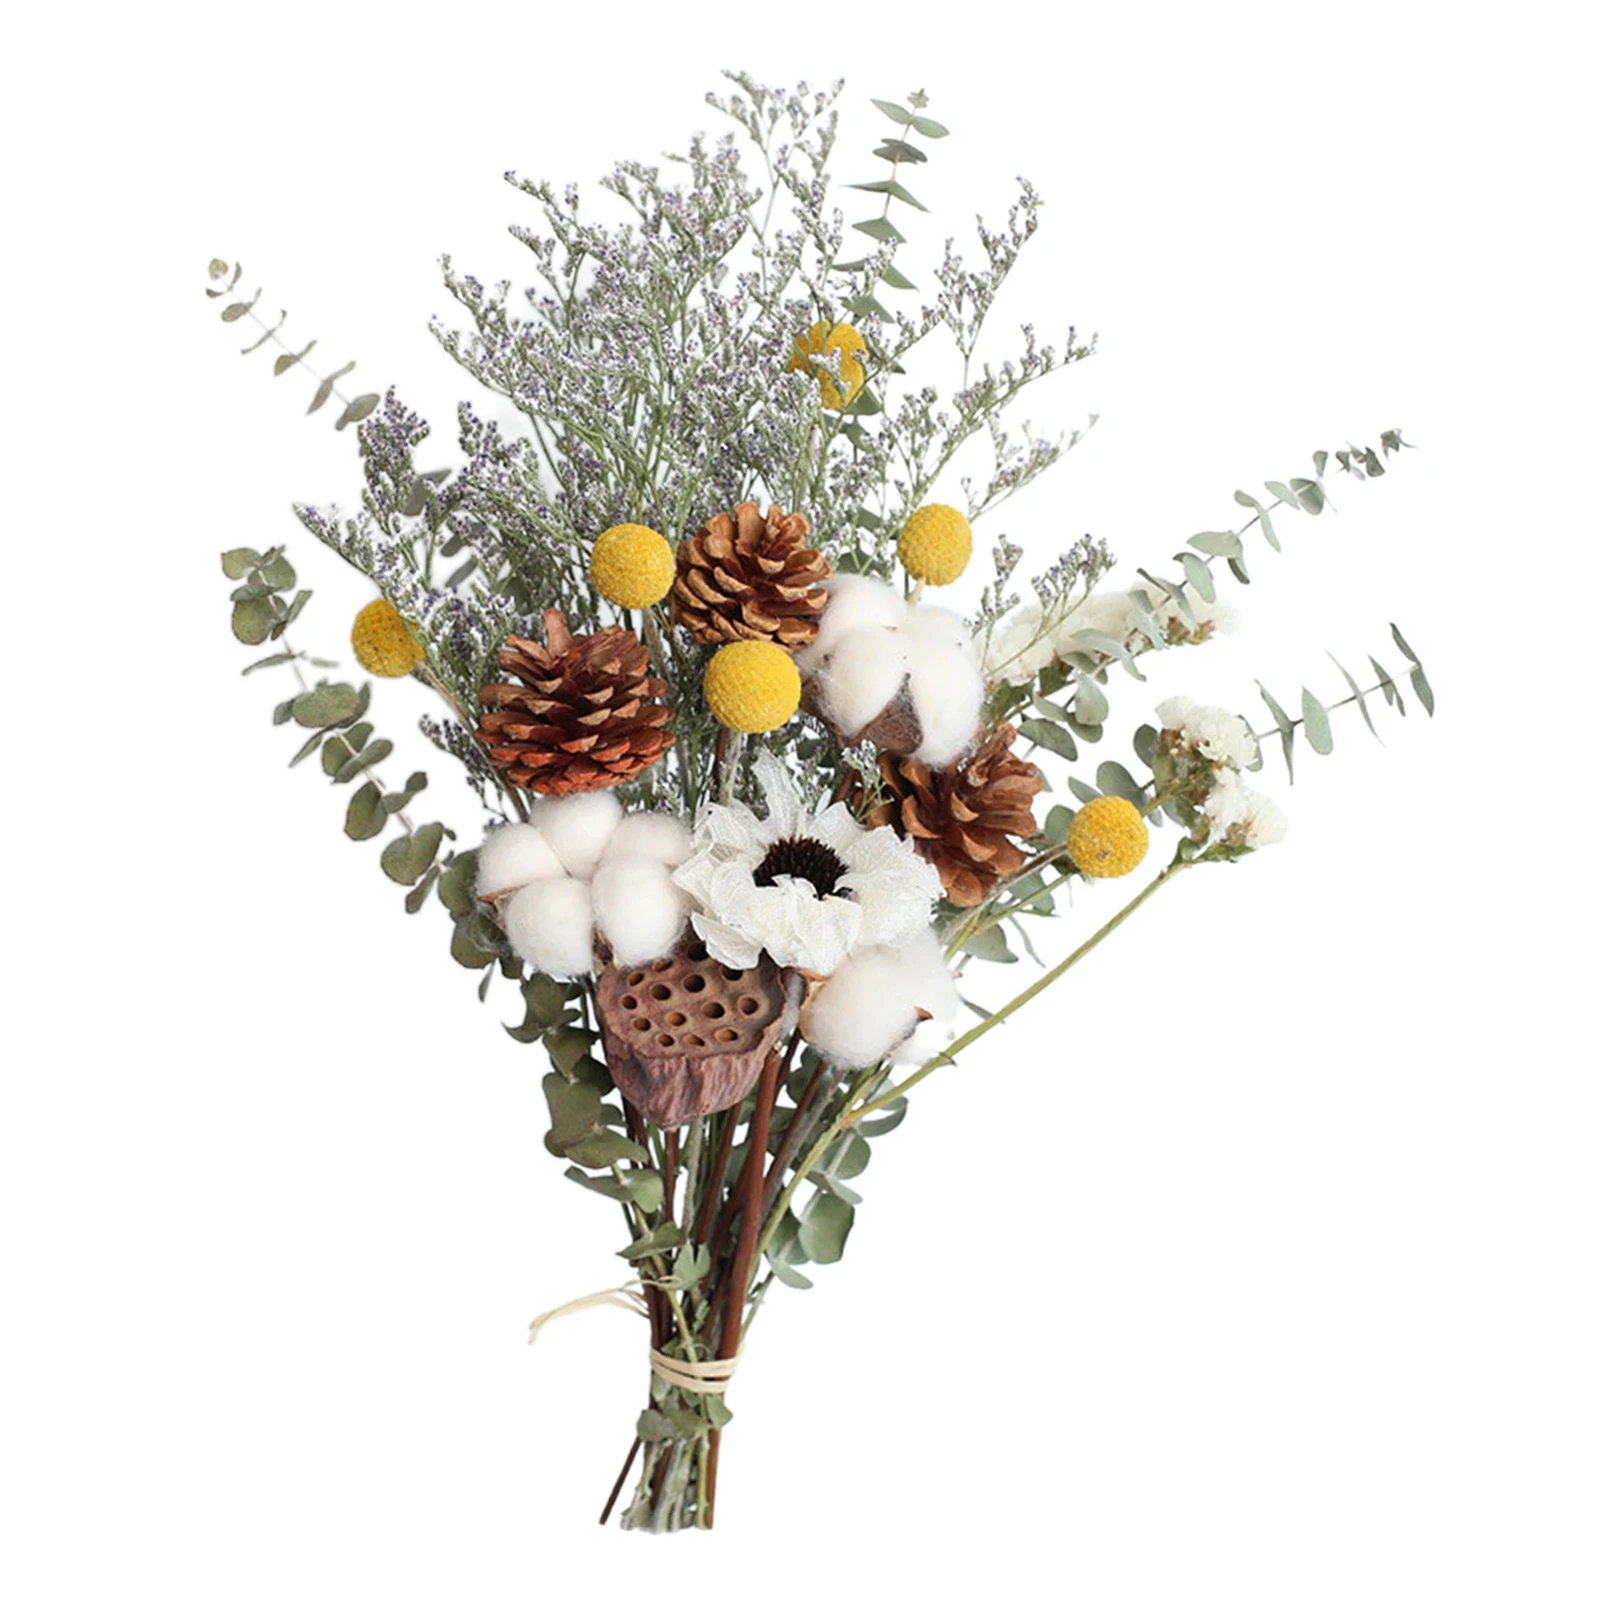 Real Dried Pine Cone Eucalyptus Daisy Flower Bunch Bouquet Home Party Decor